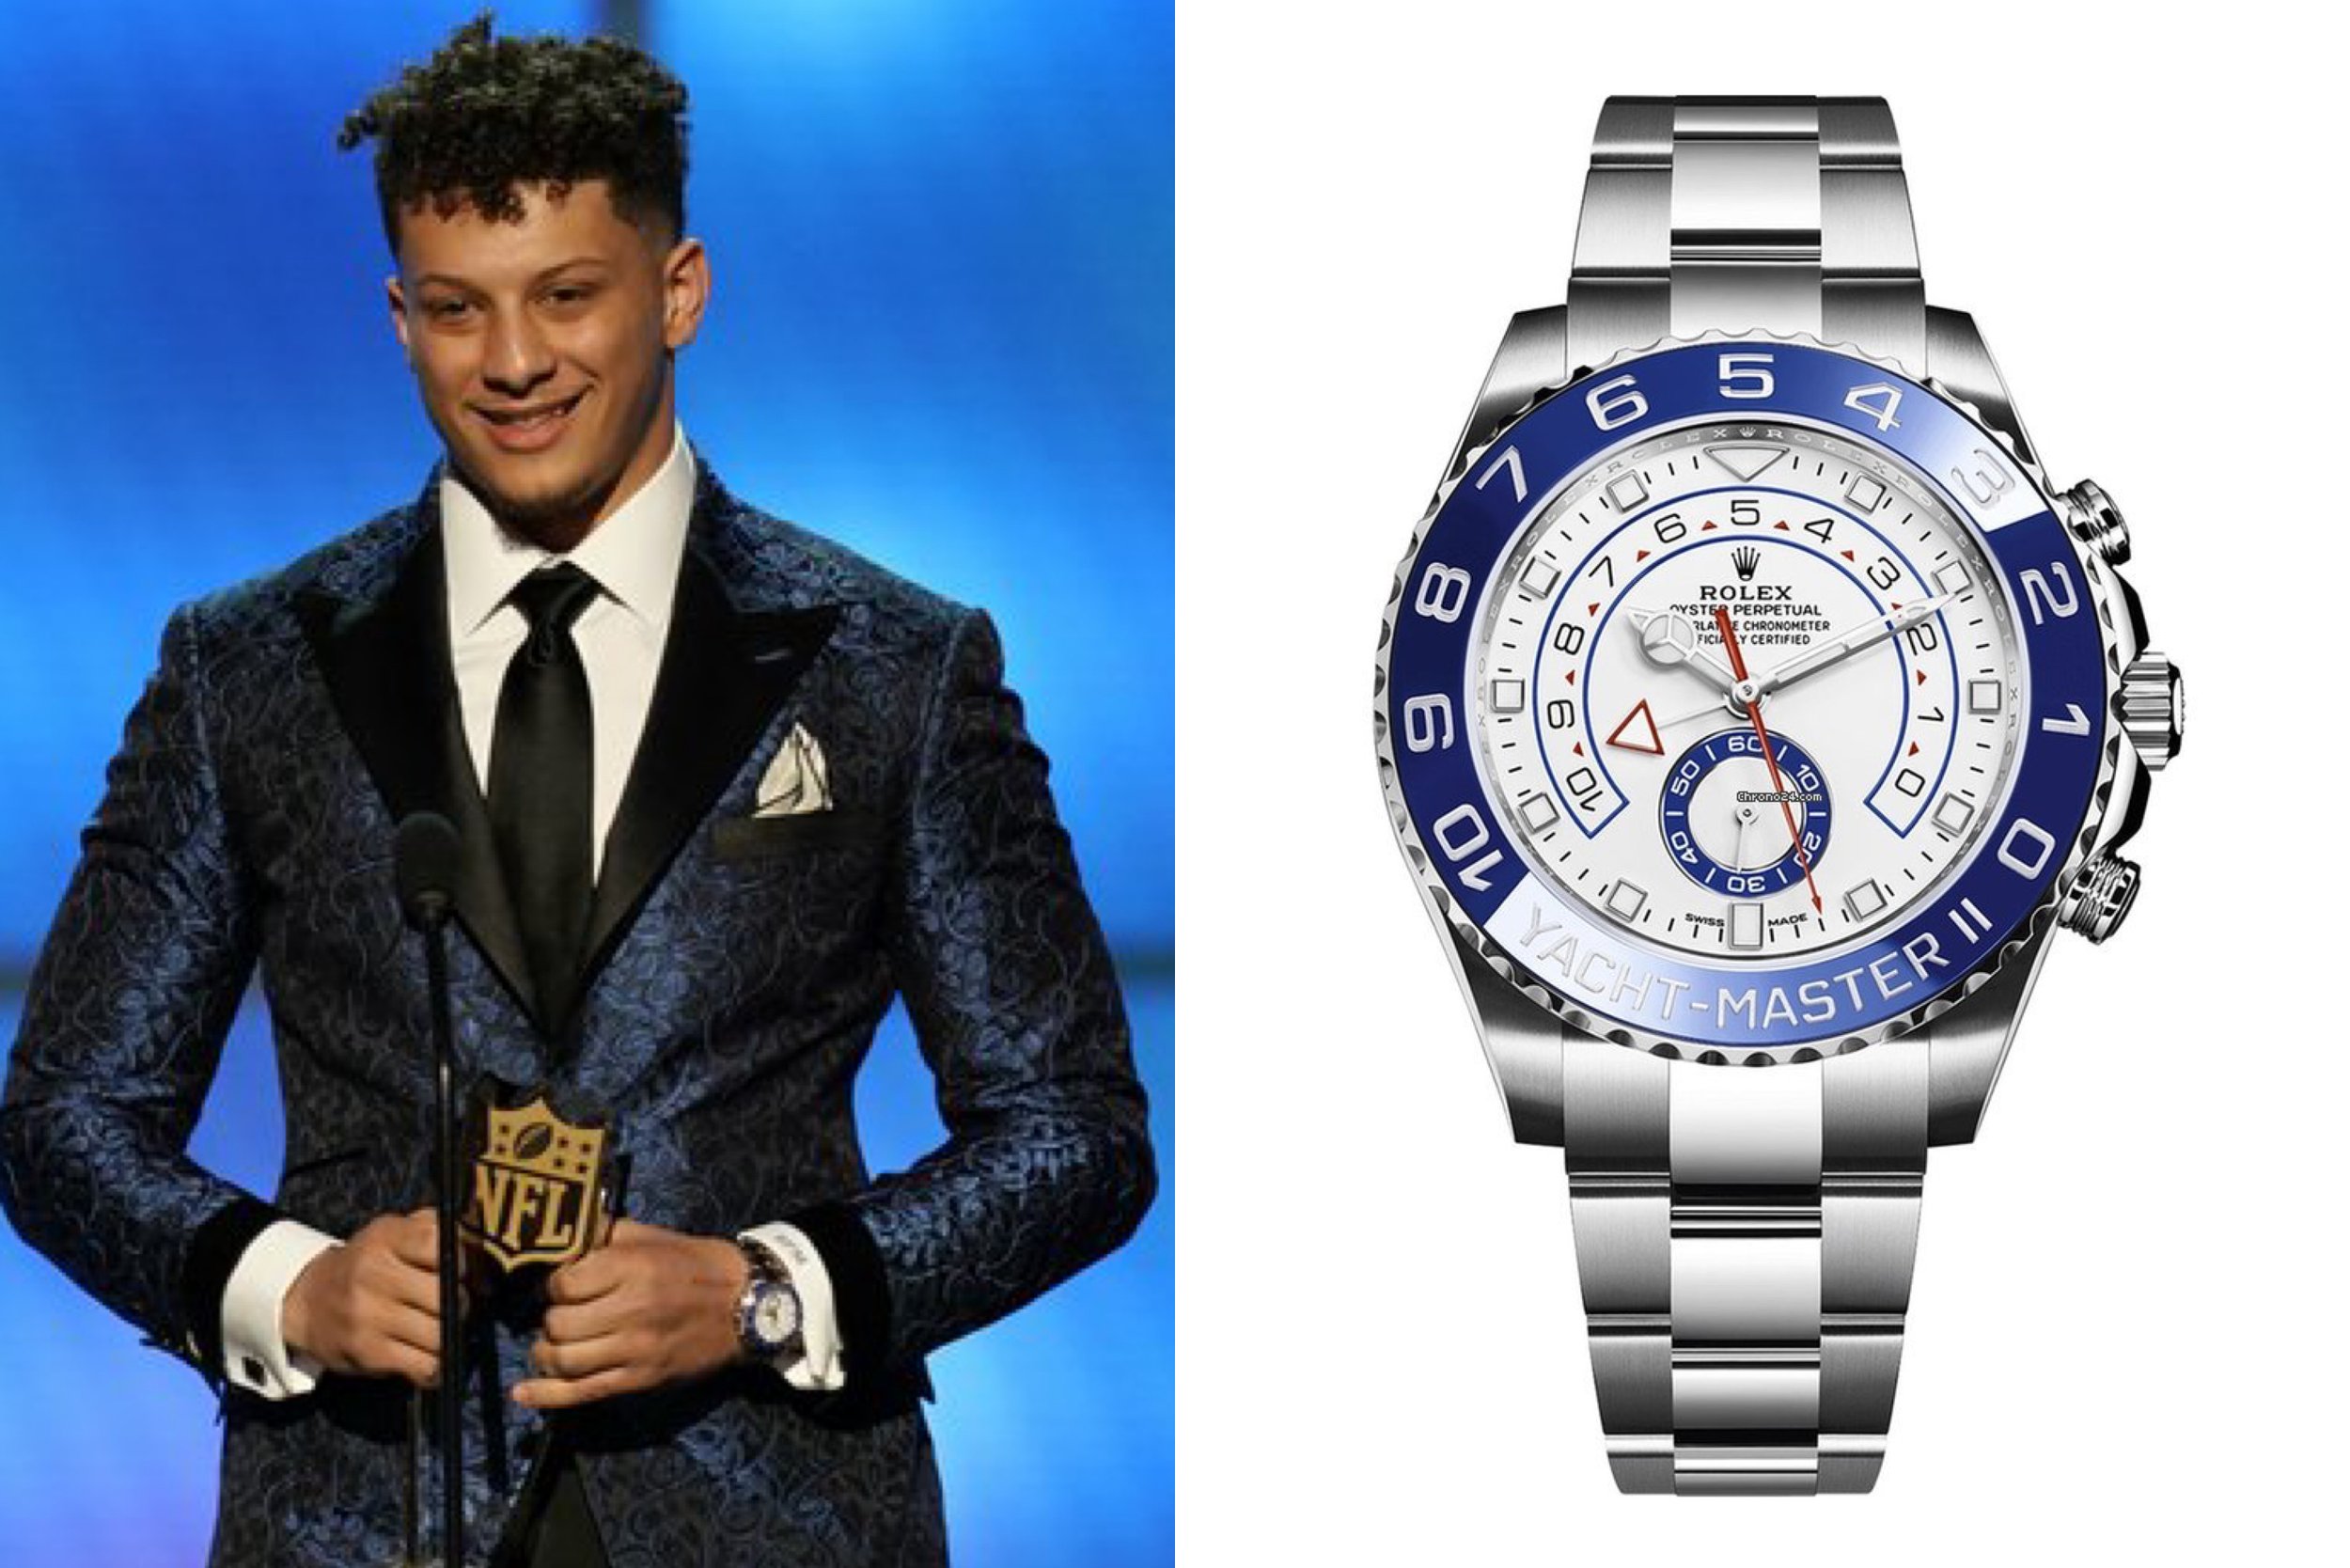 Patrick Mahomes Wore a Matching Blue Suit and Rolex to Super Bowl LVII –  Robb Report